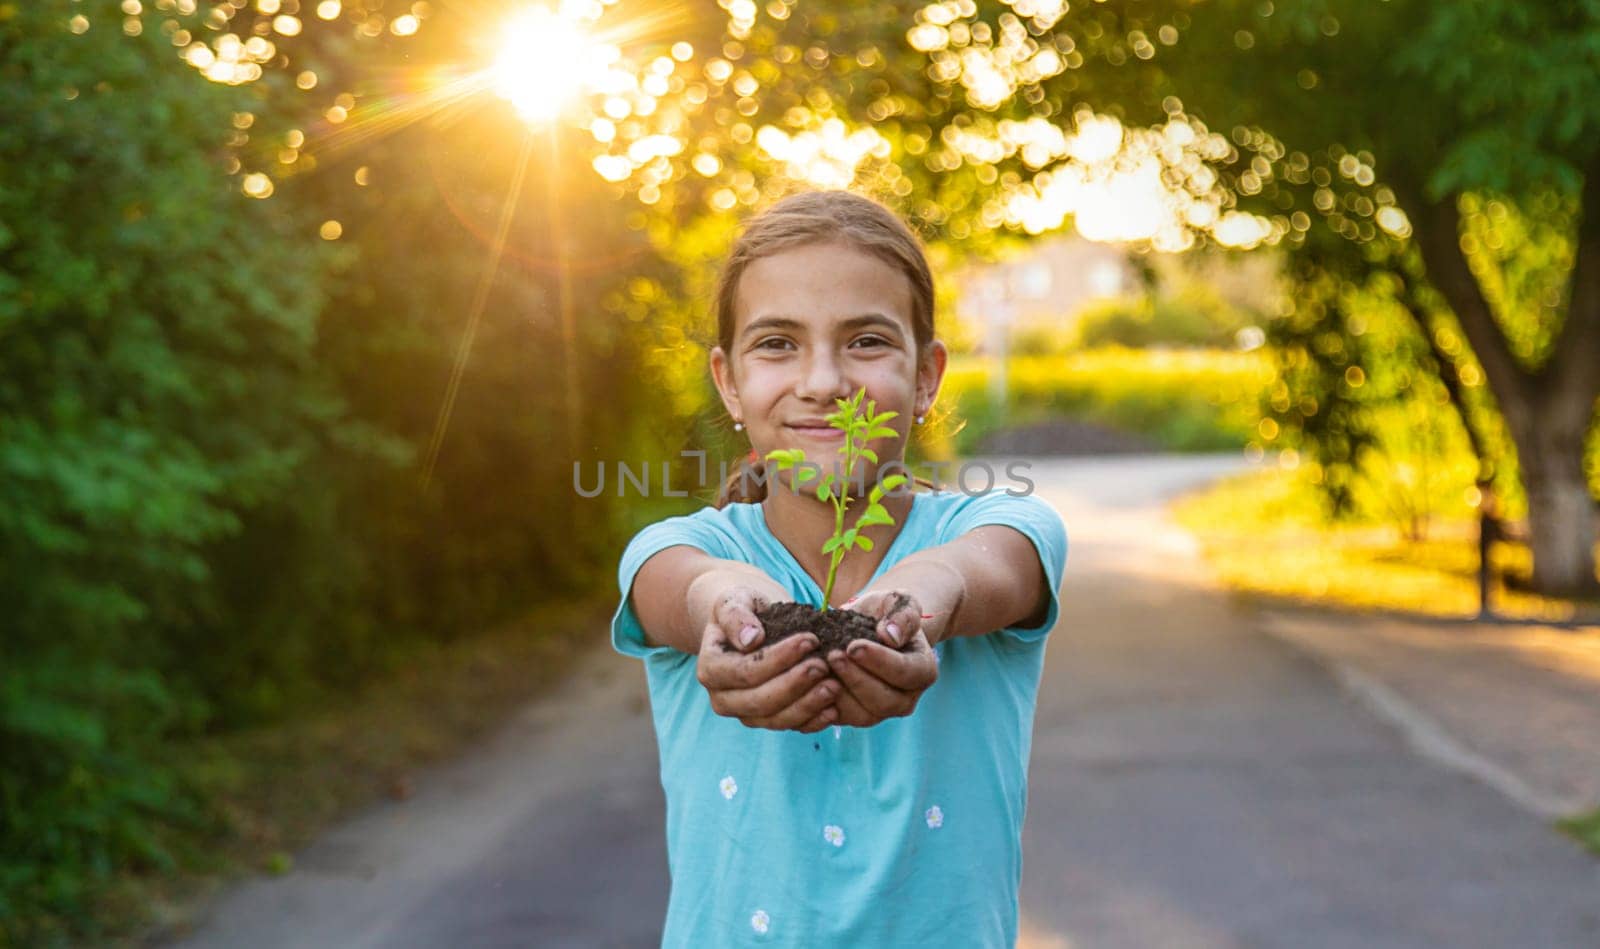 The child holds a plant in his hands. Selective focus. by yanadjana